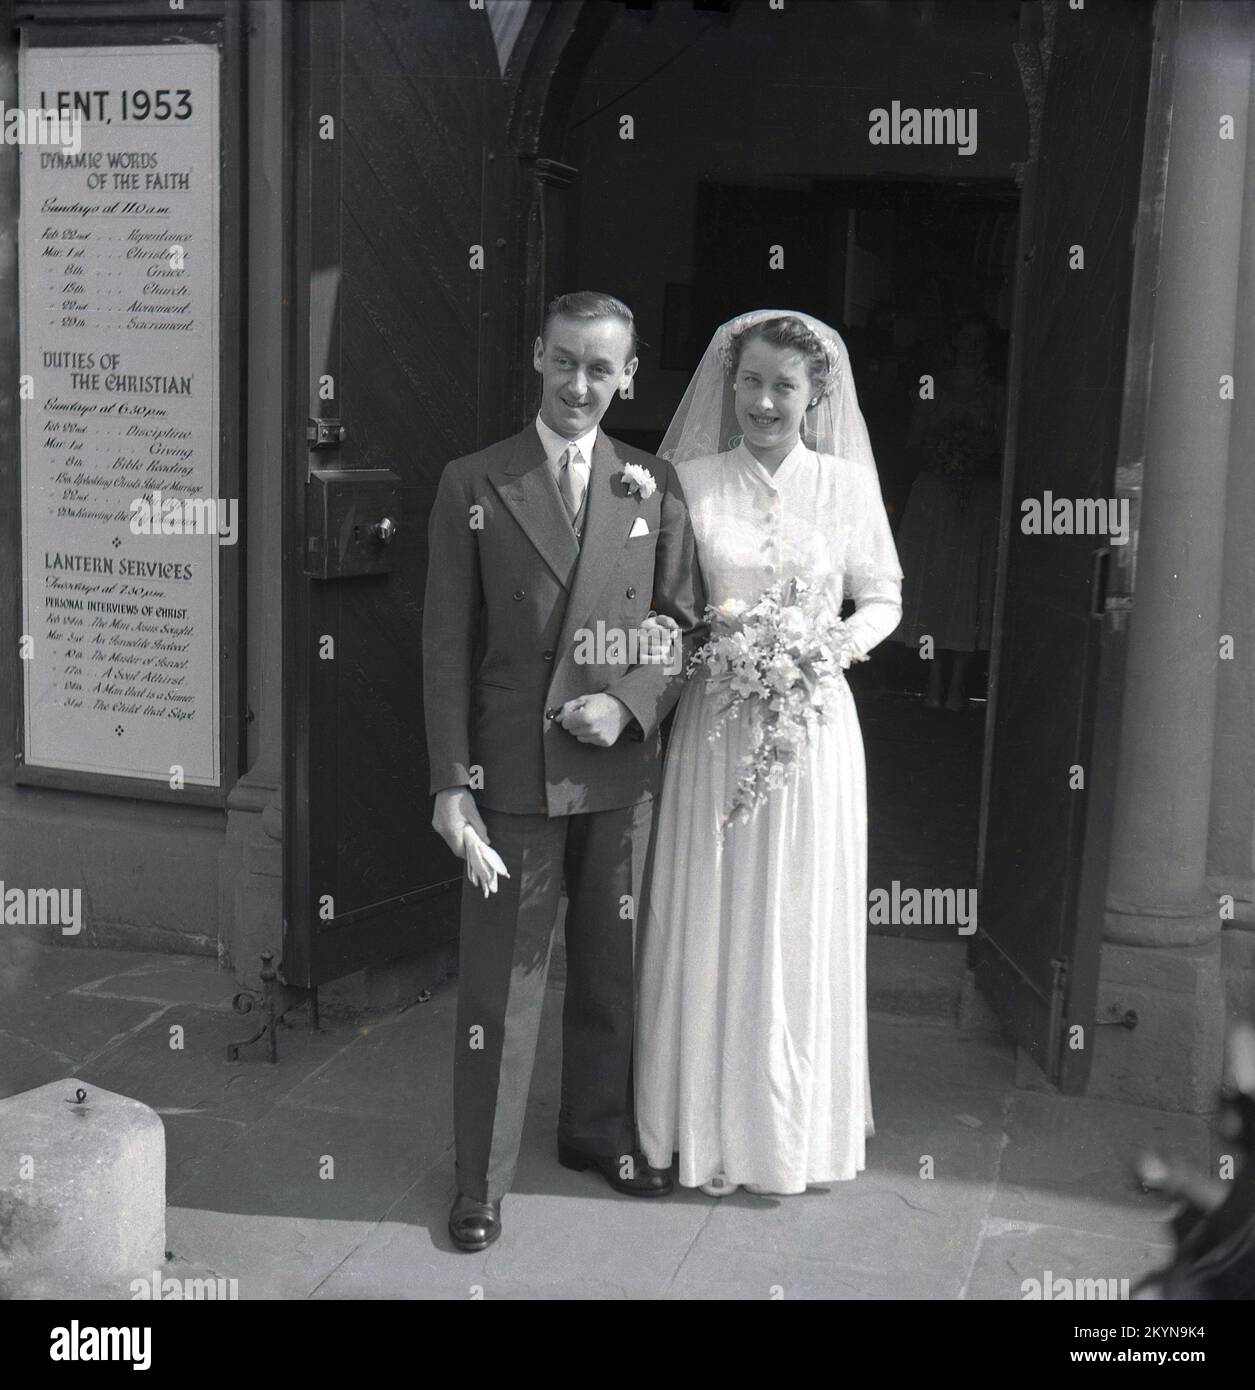 1953, historical, Lent and a newly married couple standing together outside the wooden doors at the entrance to a church, England, UK. Sign on the wall says LENT, 1953 and is enscribed with; 'Dynamic Words of Faith' Duties of the Christian, including Discipline, Giving, Bible Reading, Upholding Christ's ? of Marriage, Worship, Lantern Services, including Personal Interviews of Christ. Stock Photo